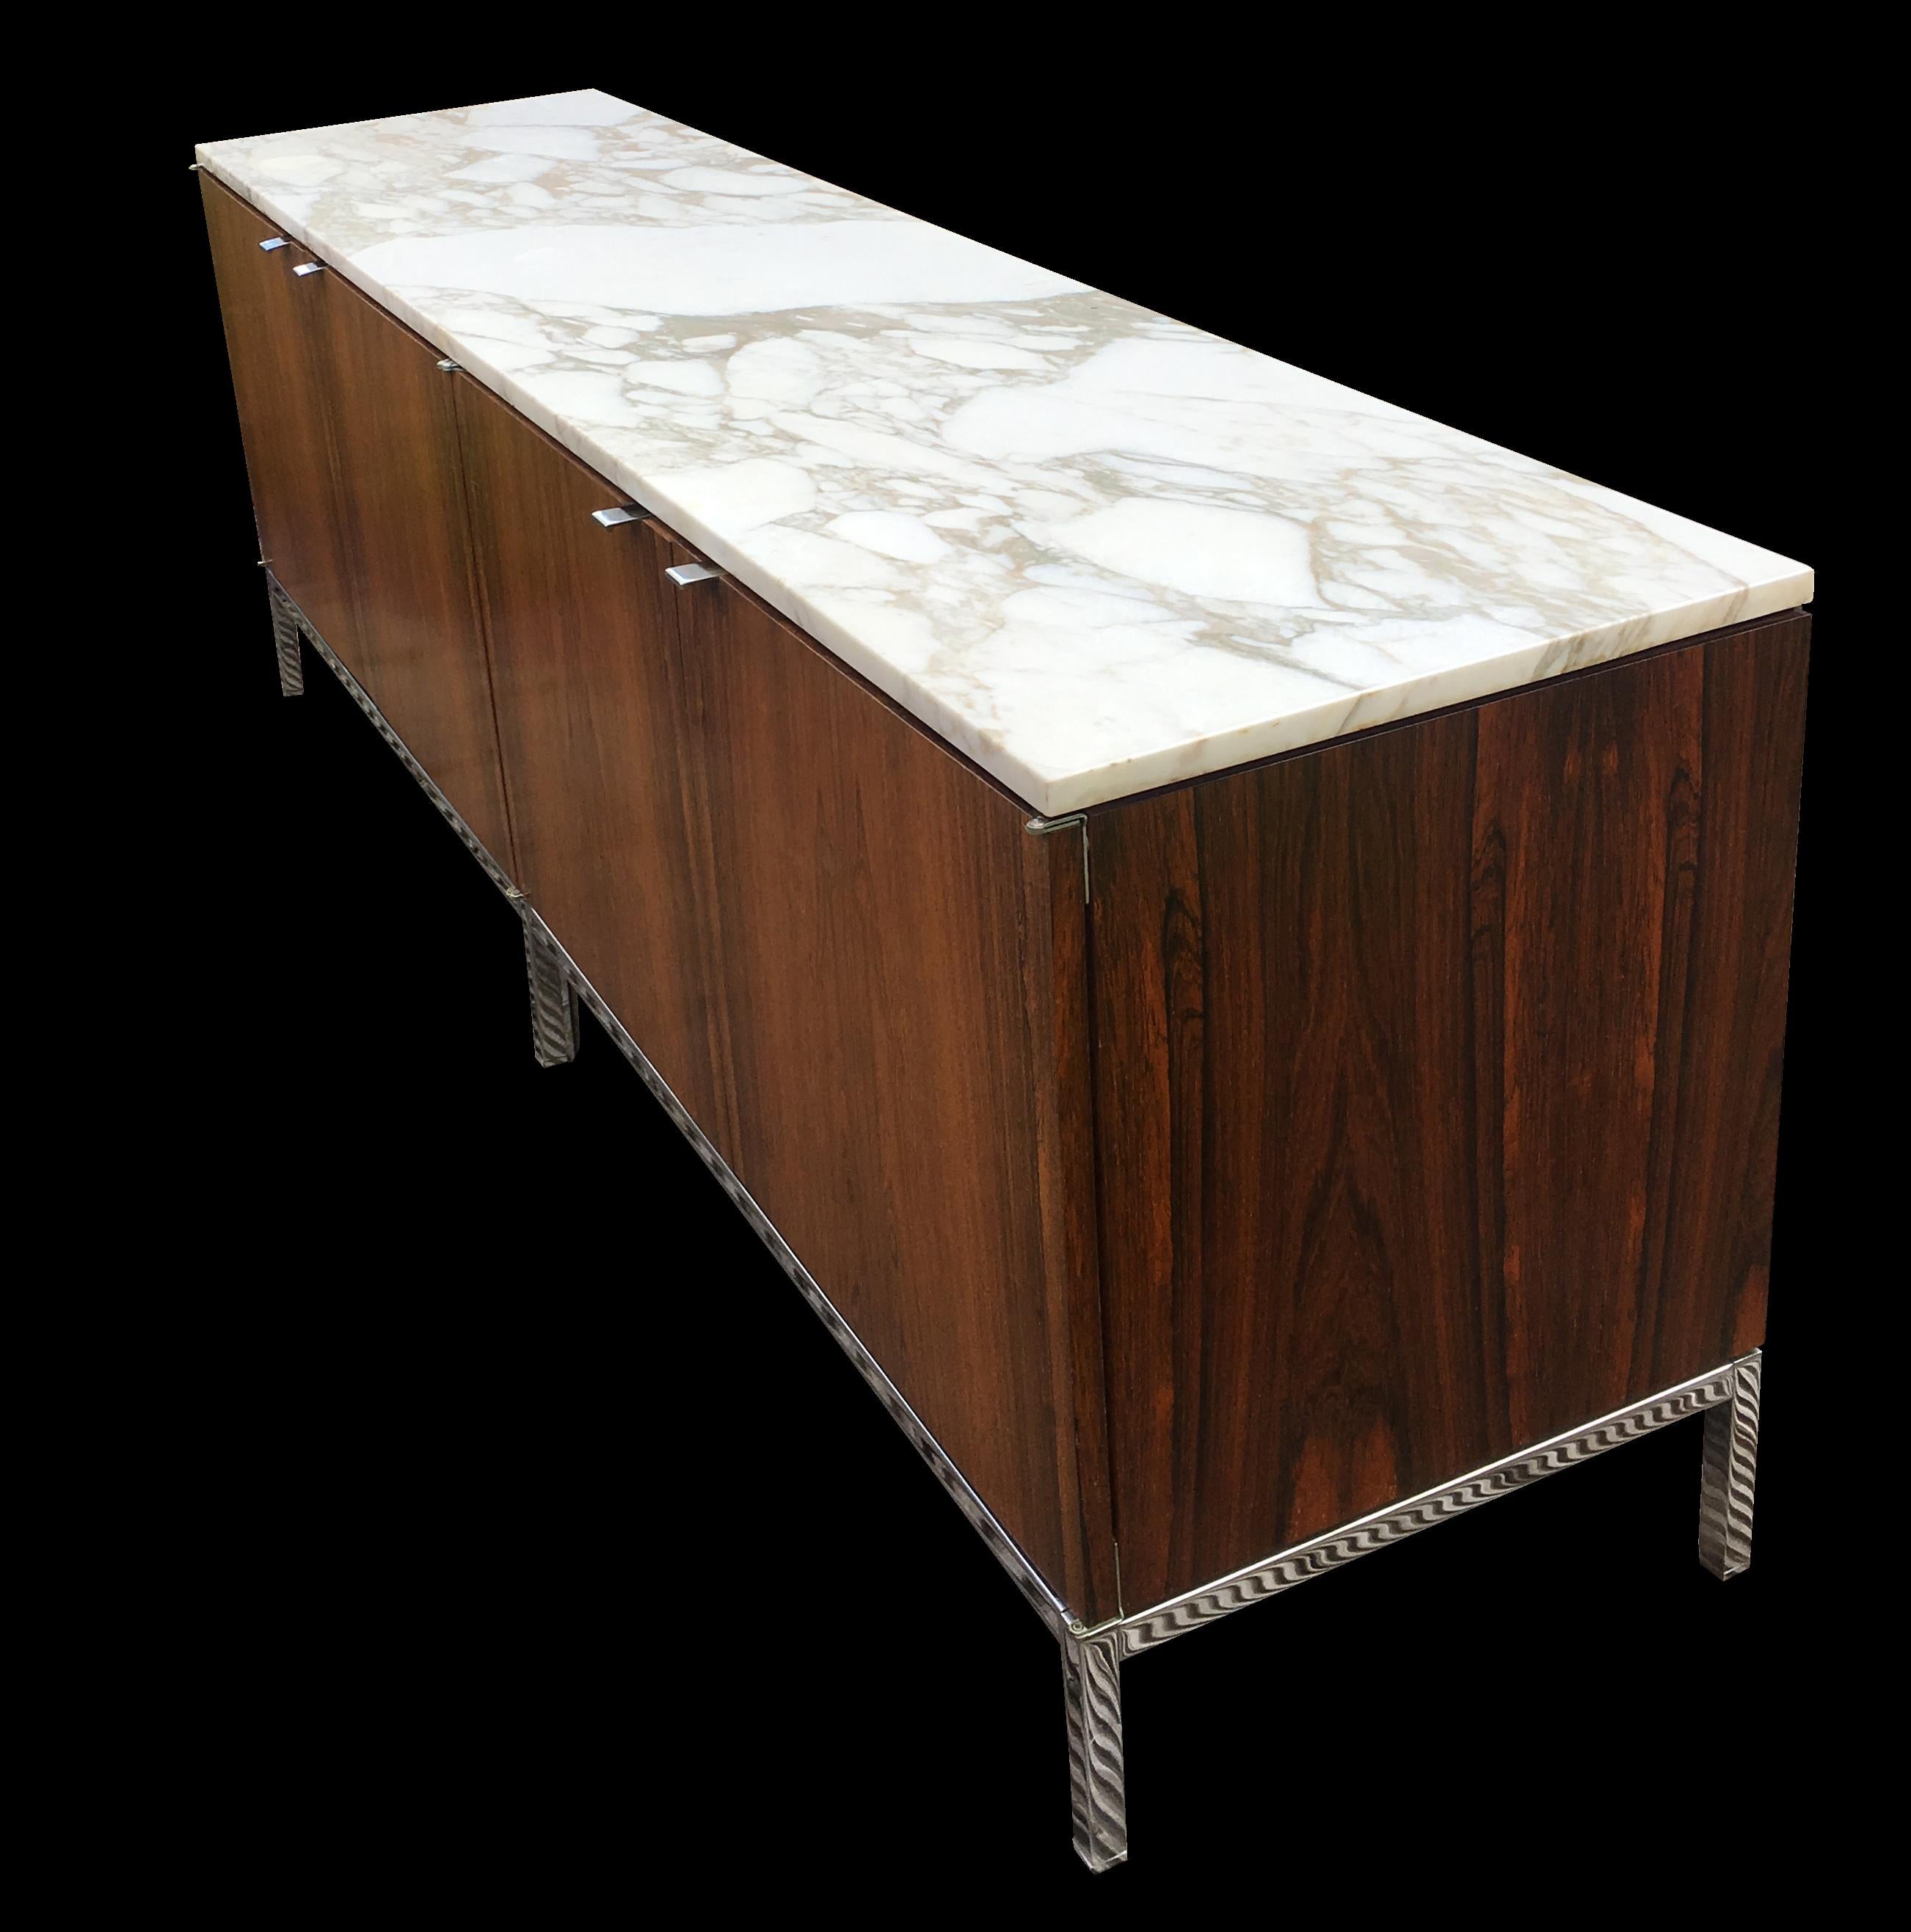 A very good original example of this ultra cool Classic midcentury Credenza, rosewood veneers, the original Calacutta marble top and all interior shelves in place.